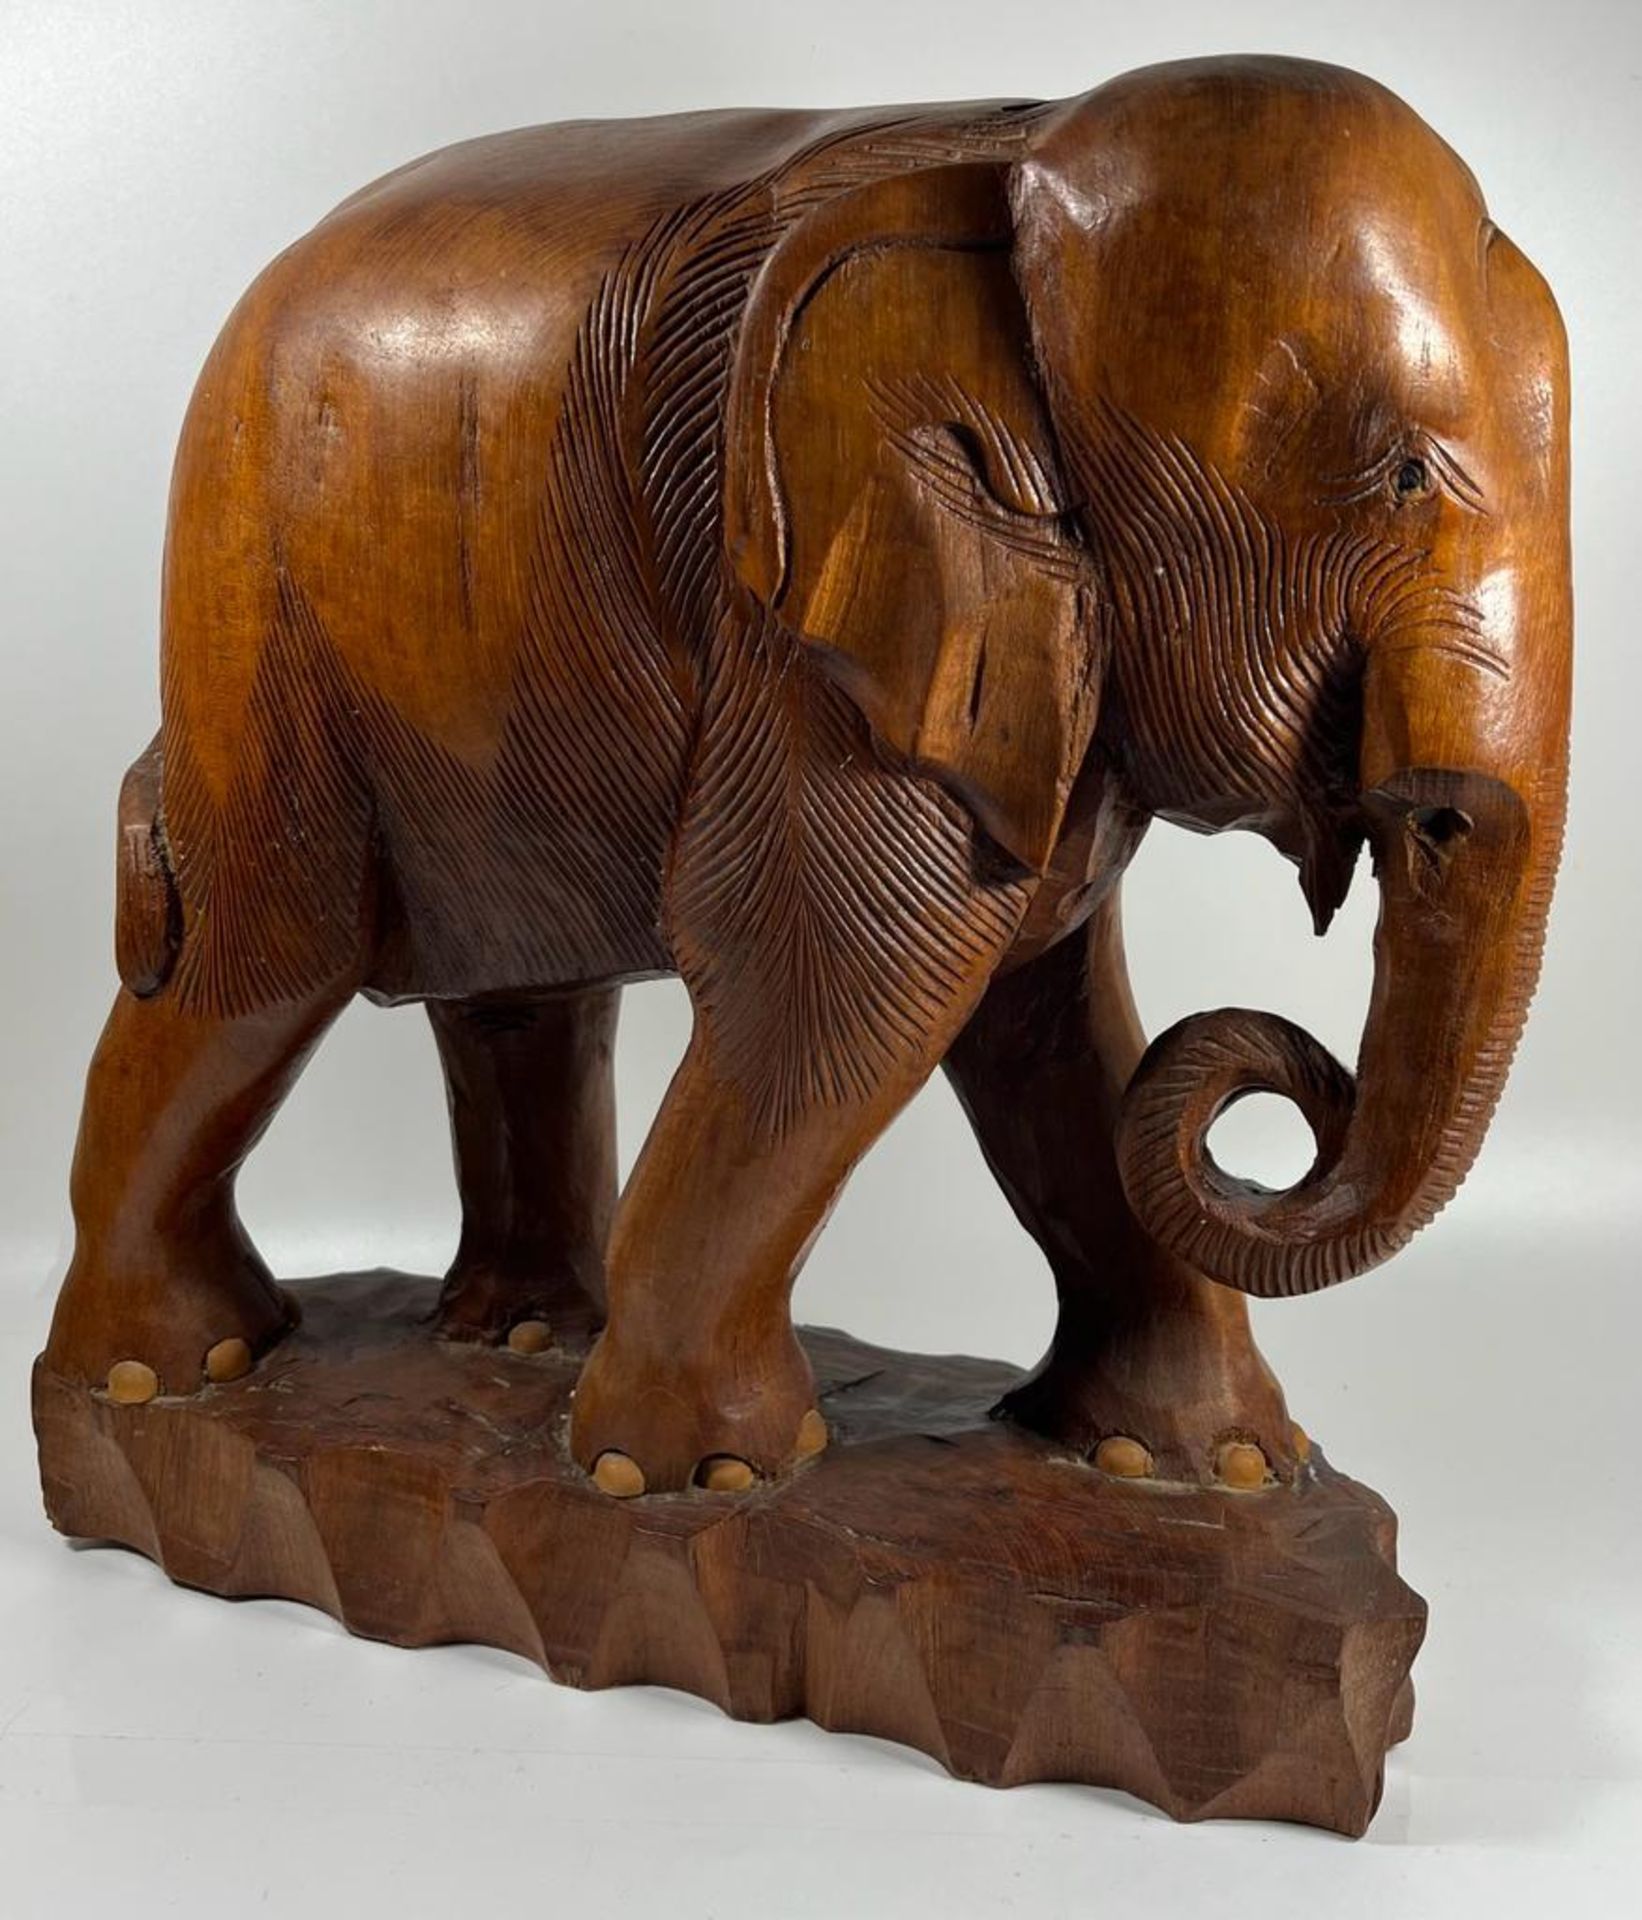 A LARGE AND HEAVY VINTAGE CARVED SOLID TEAK ELEPHANT MODEL, LIKELY CARVED FROM ONE PIECE OF TEAK